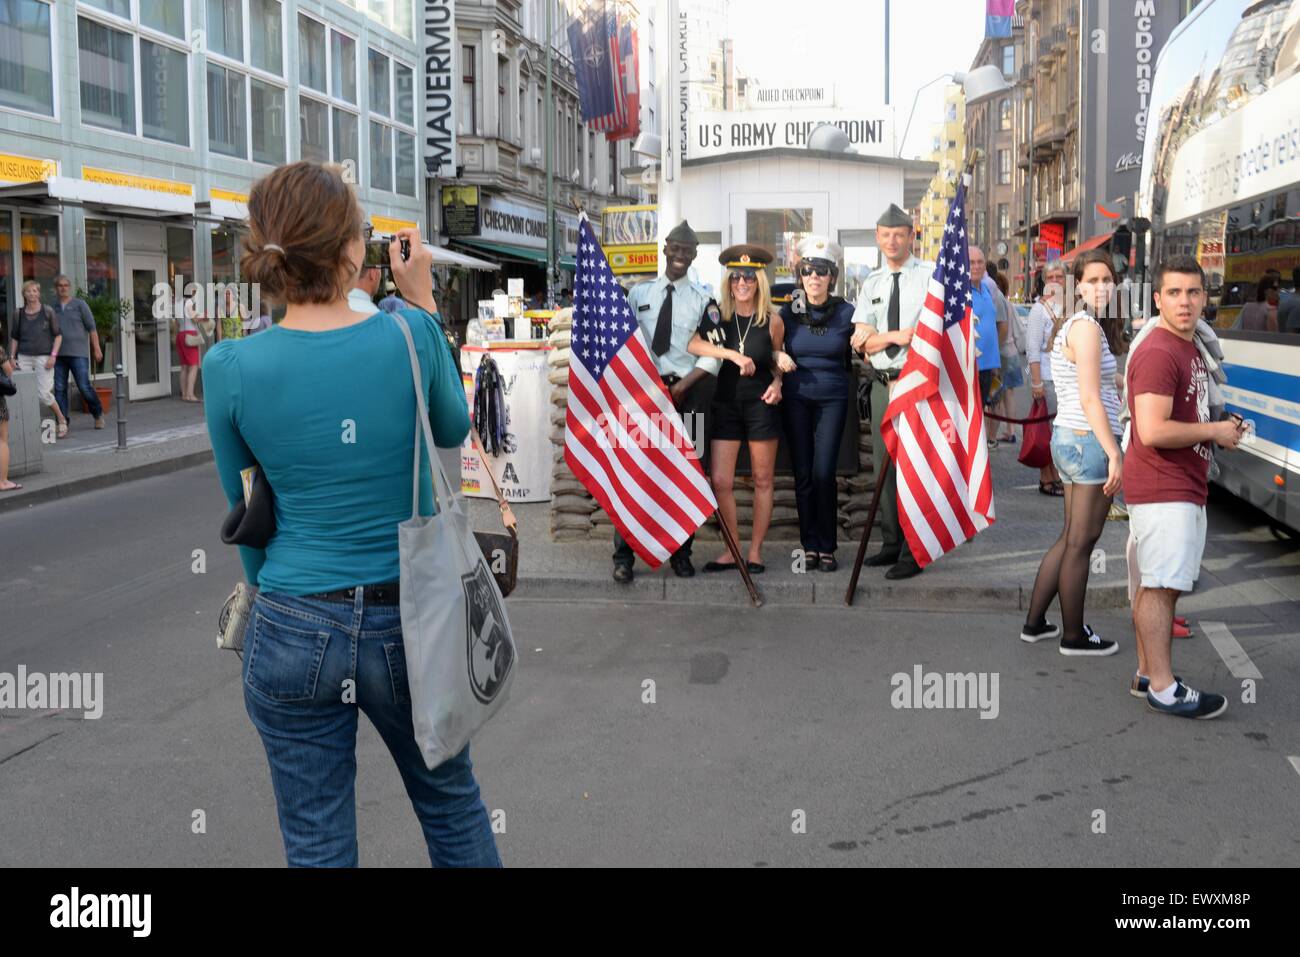 Checkpoint Charlie, Berlin, Germany. Tourists taking photos with servicemen. Stock Photo